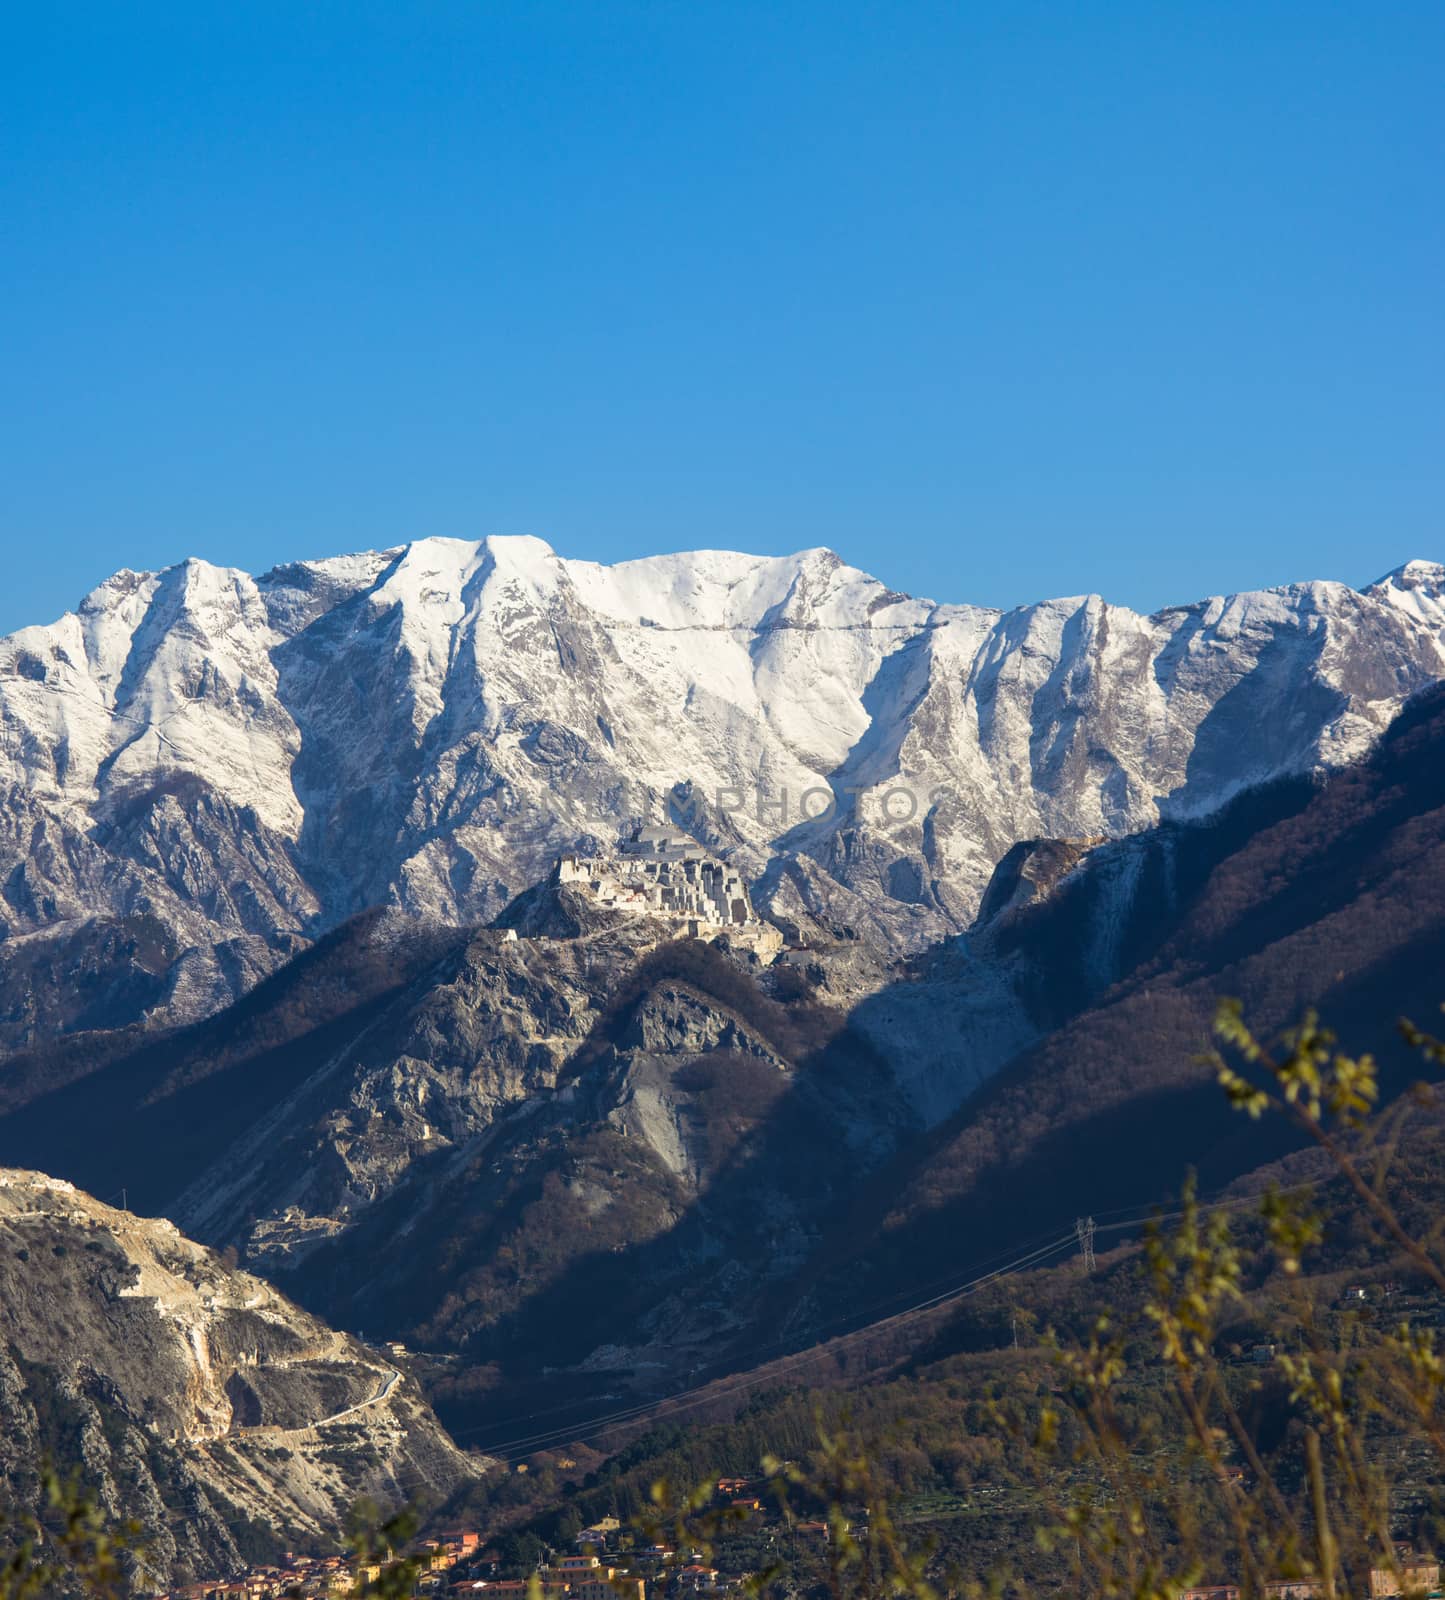 The first snow of the Apuan Alps whitening white marble quarries